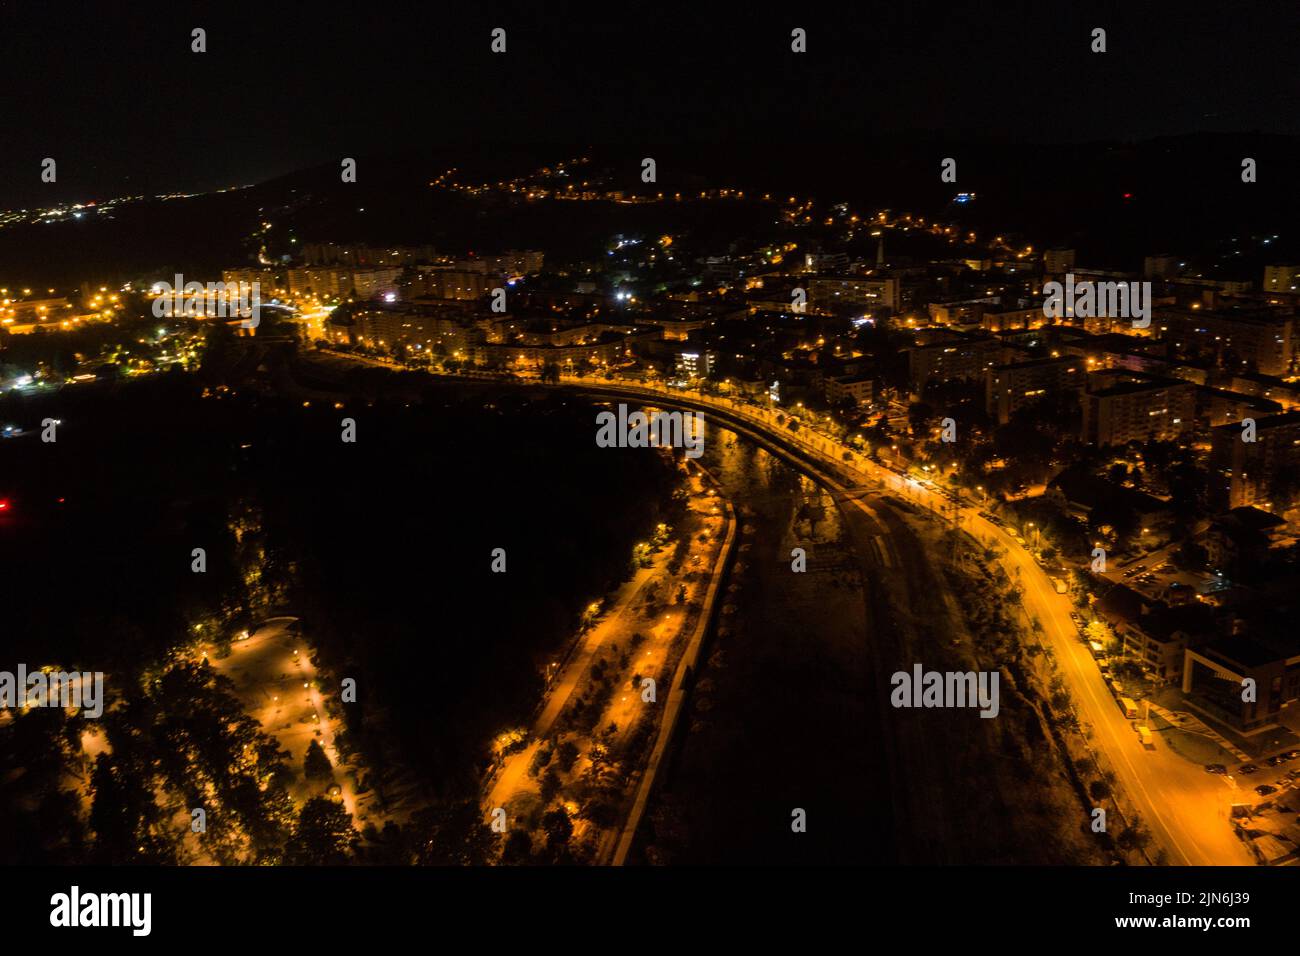 Aerial view of Cluj Napoca city by night. Urban landscape with illuminated streets, Romania Stock Photo